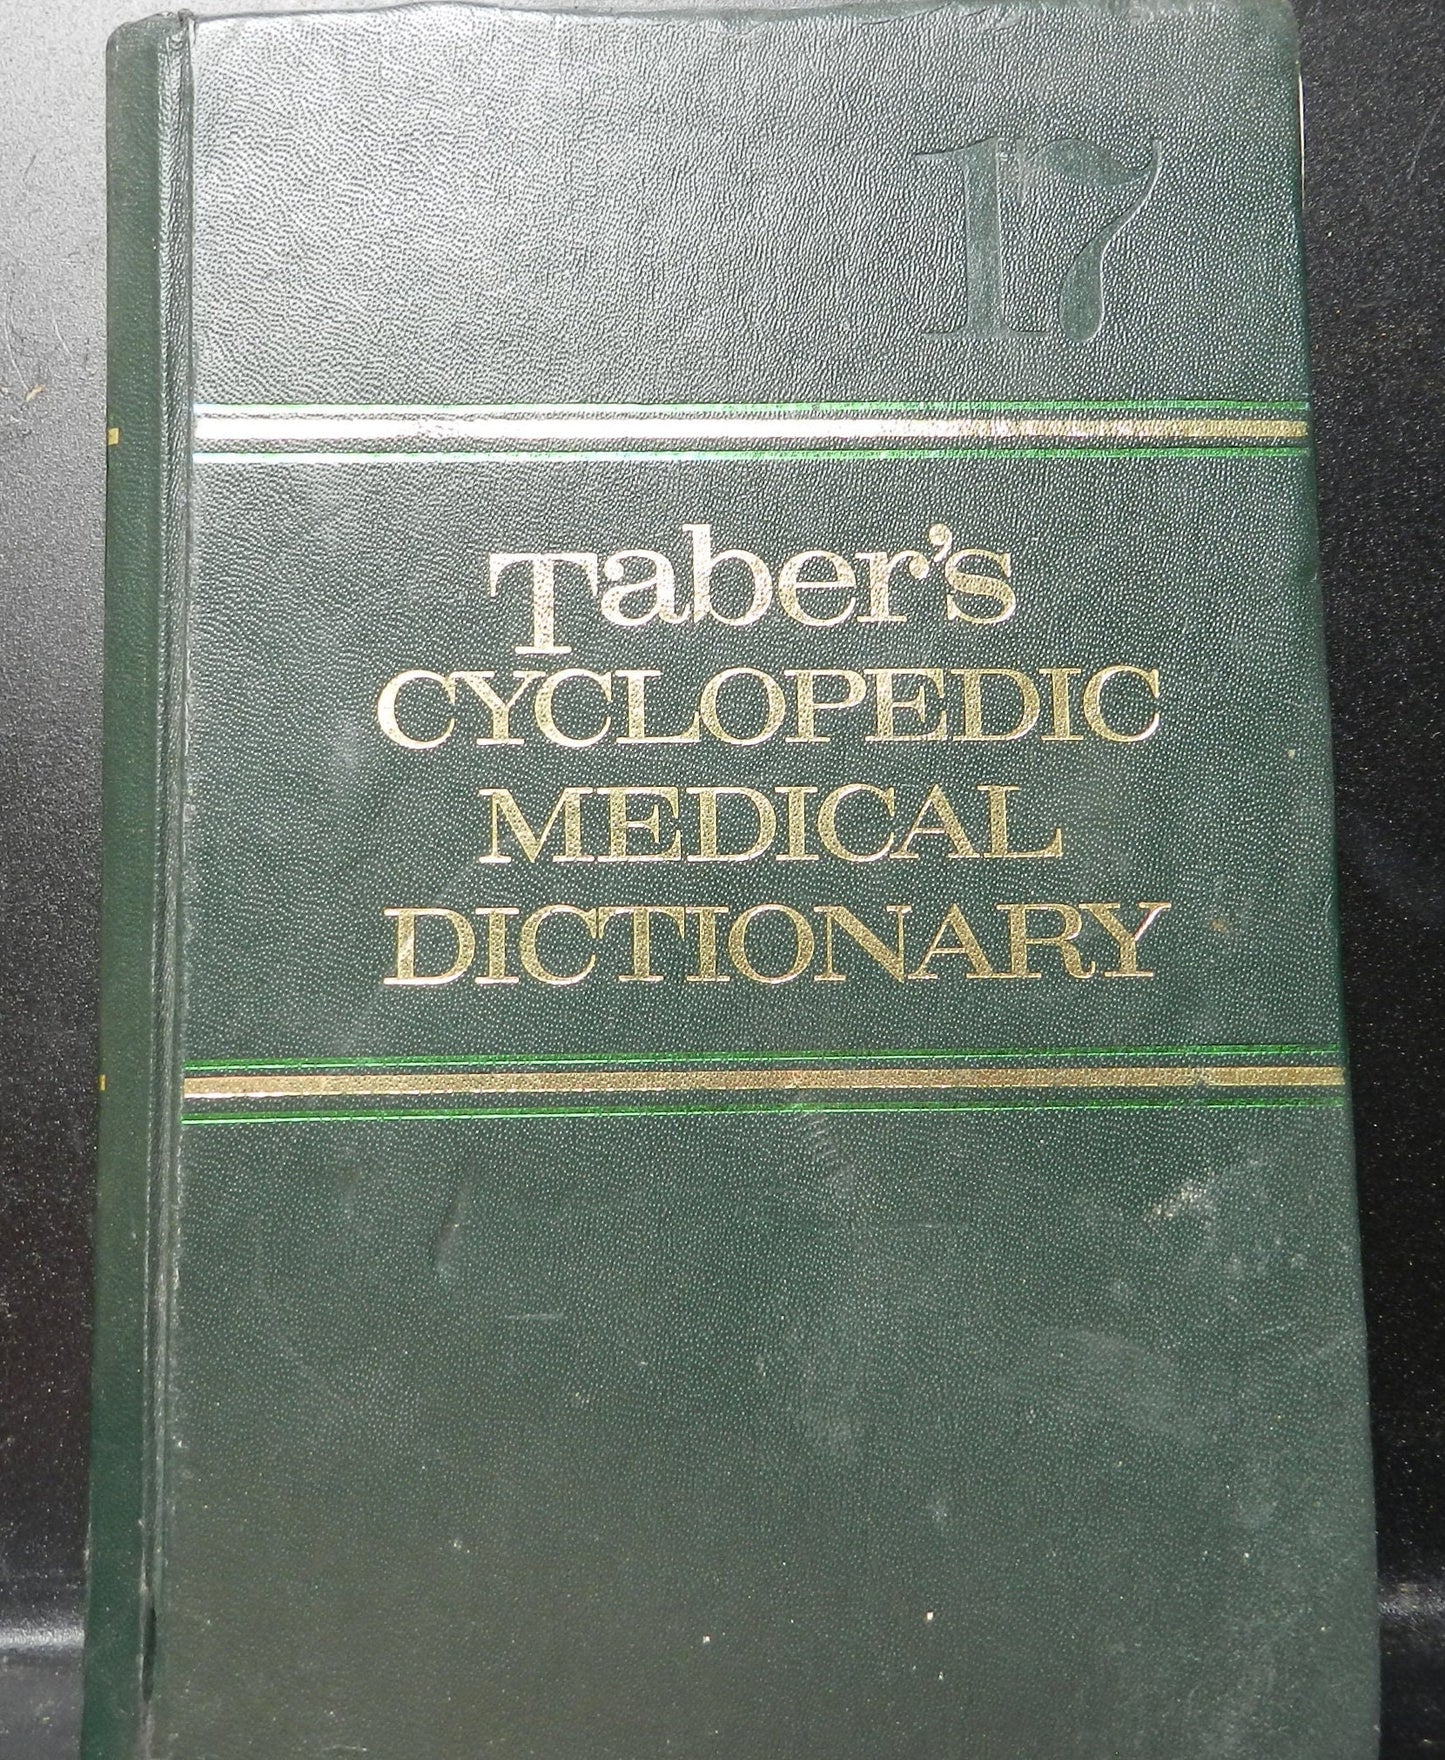 Vintage Book "Taber's Cyclopedic Medical Dictionary" 1993  Doctor's Dictionary 17th Edition VG